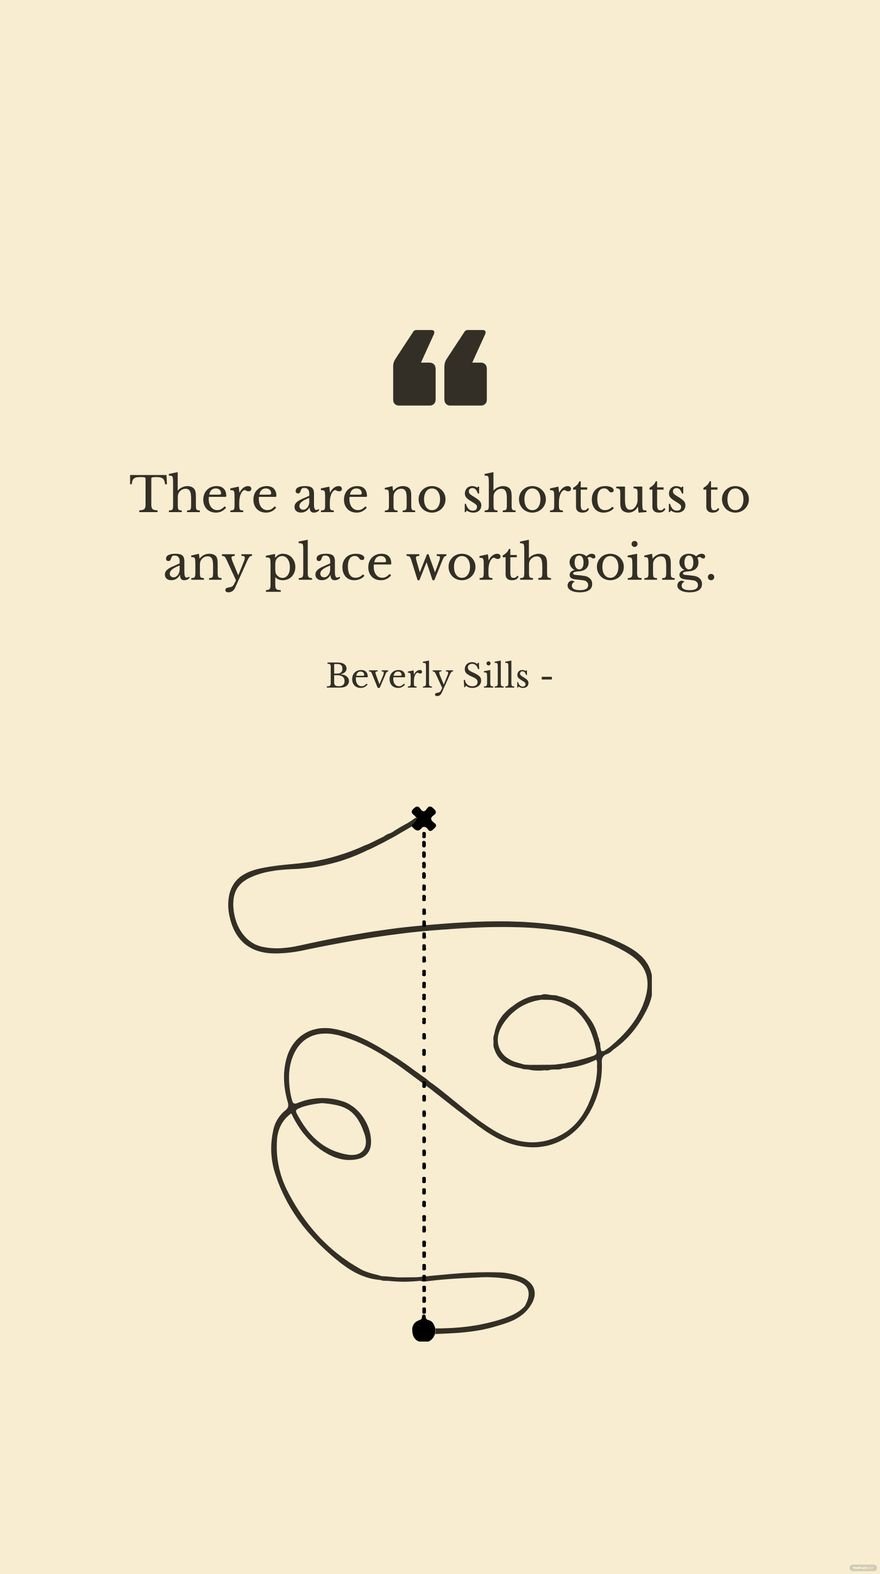 Beverly Sills - There are no shortcuts to any place worth going.